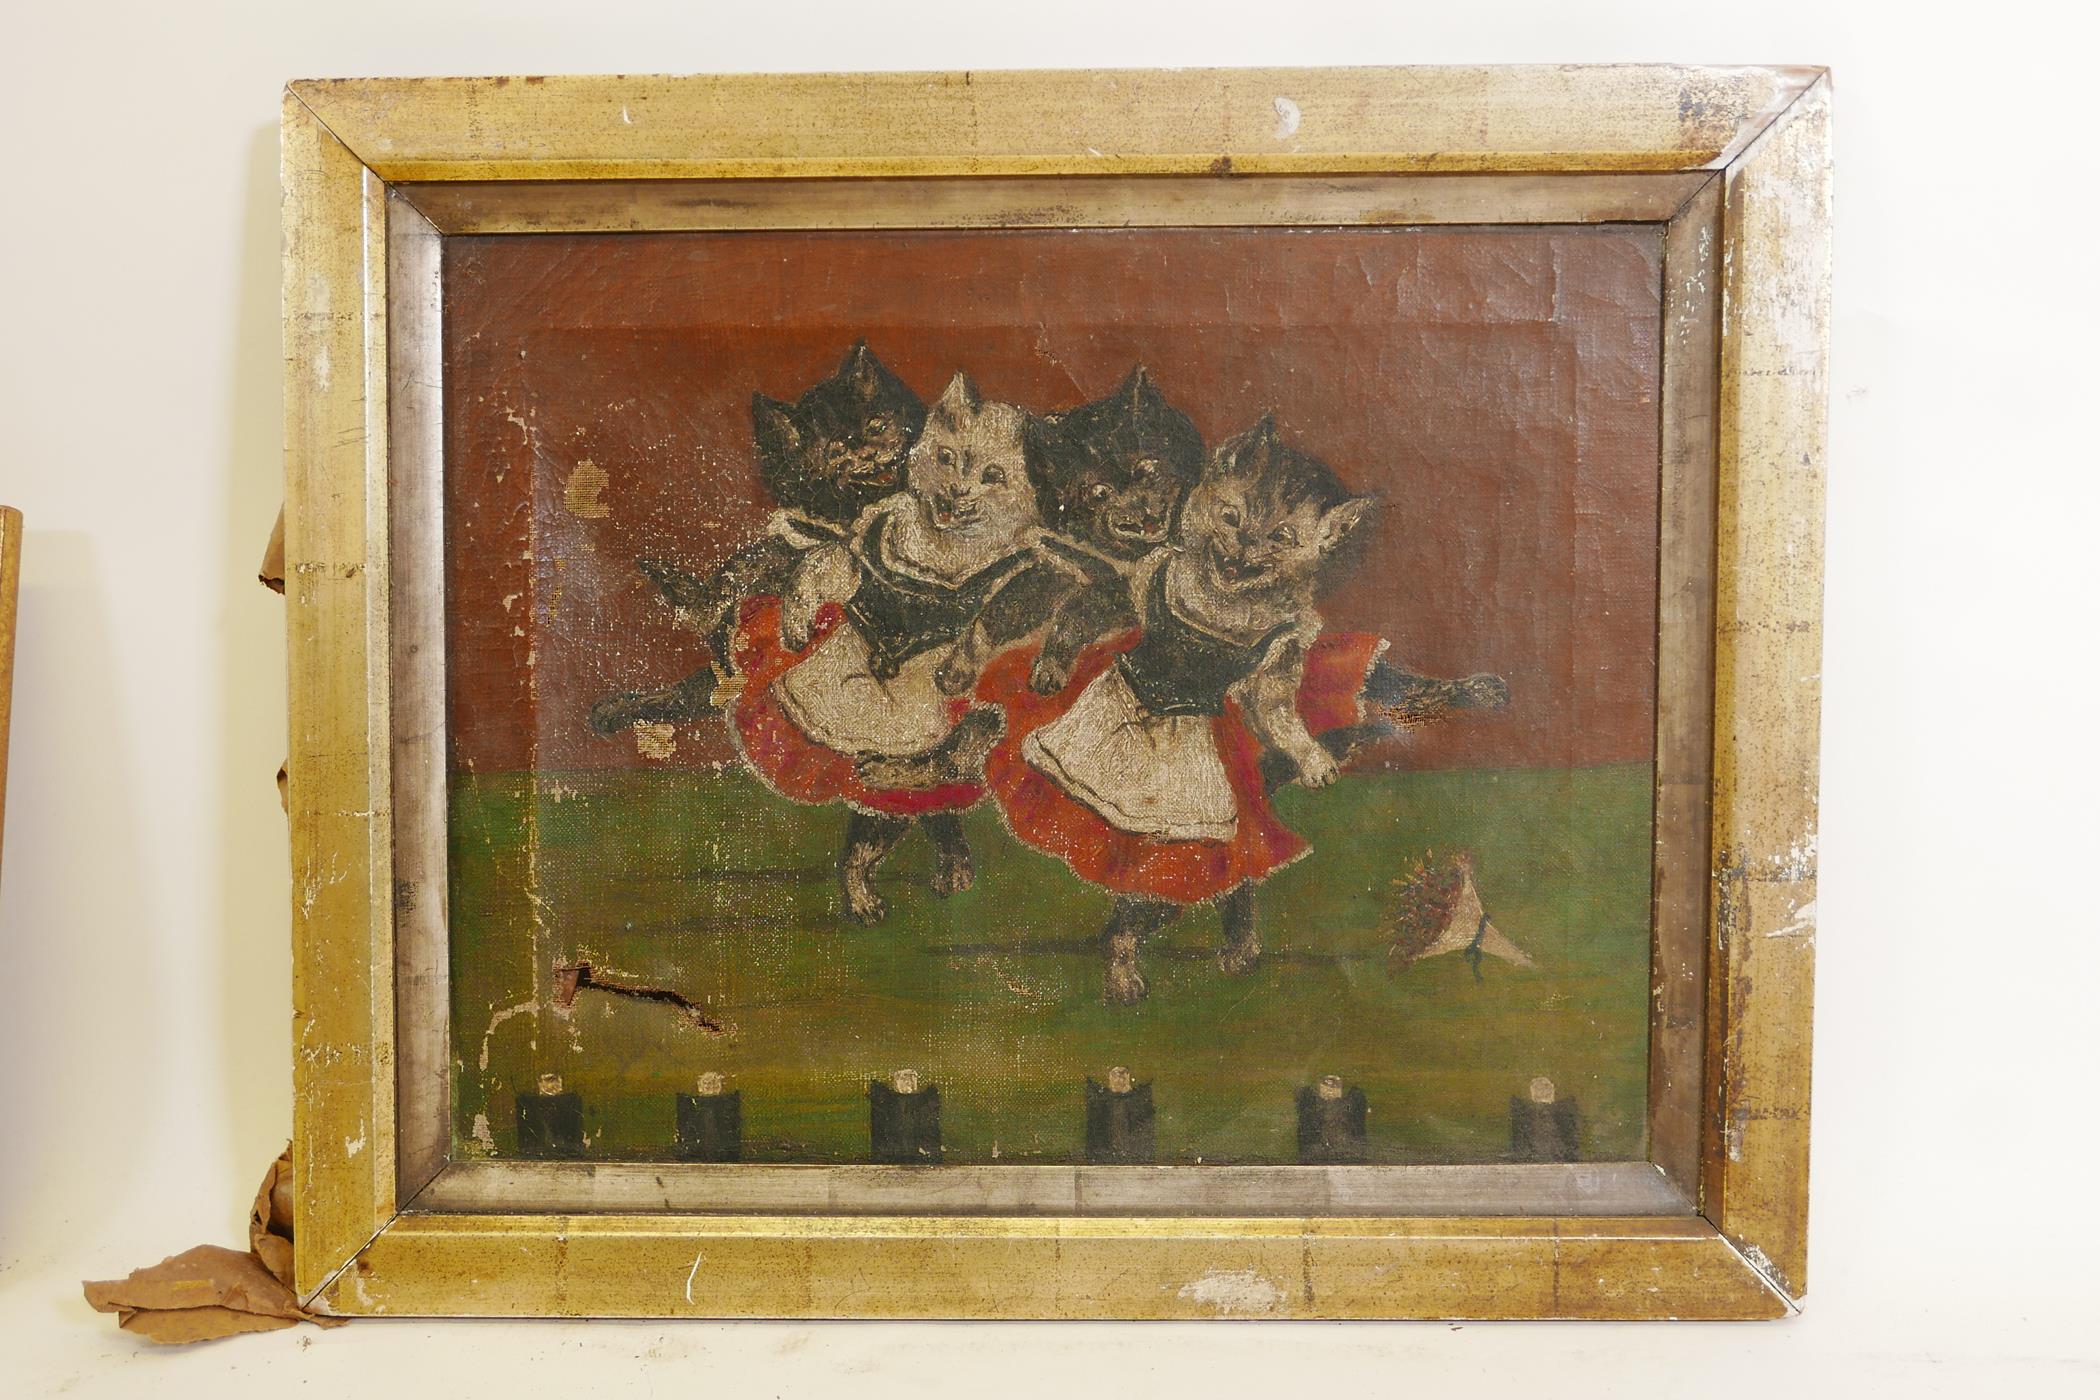 Dancing cats, in the manner of Louis Wain, oil on canvas, unsigned, late C19th/early C20th, A/F, 14"